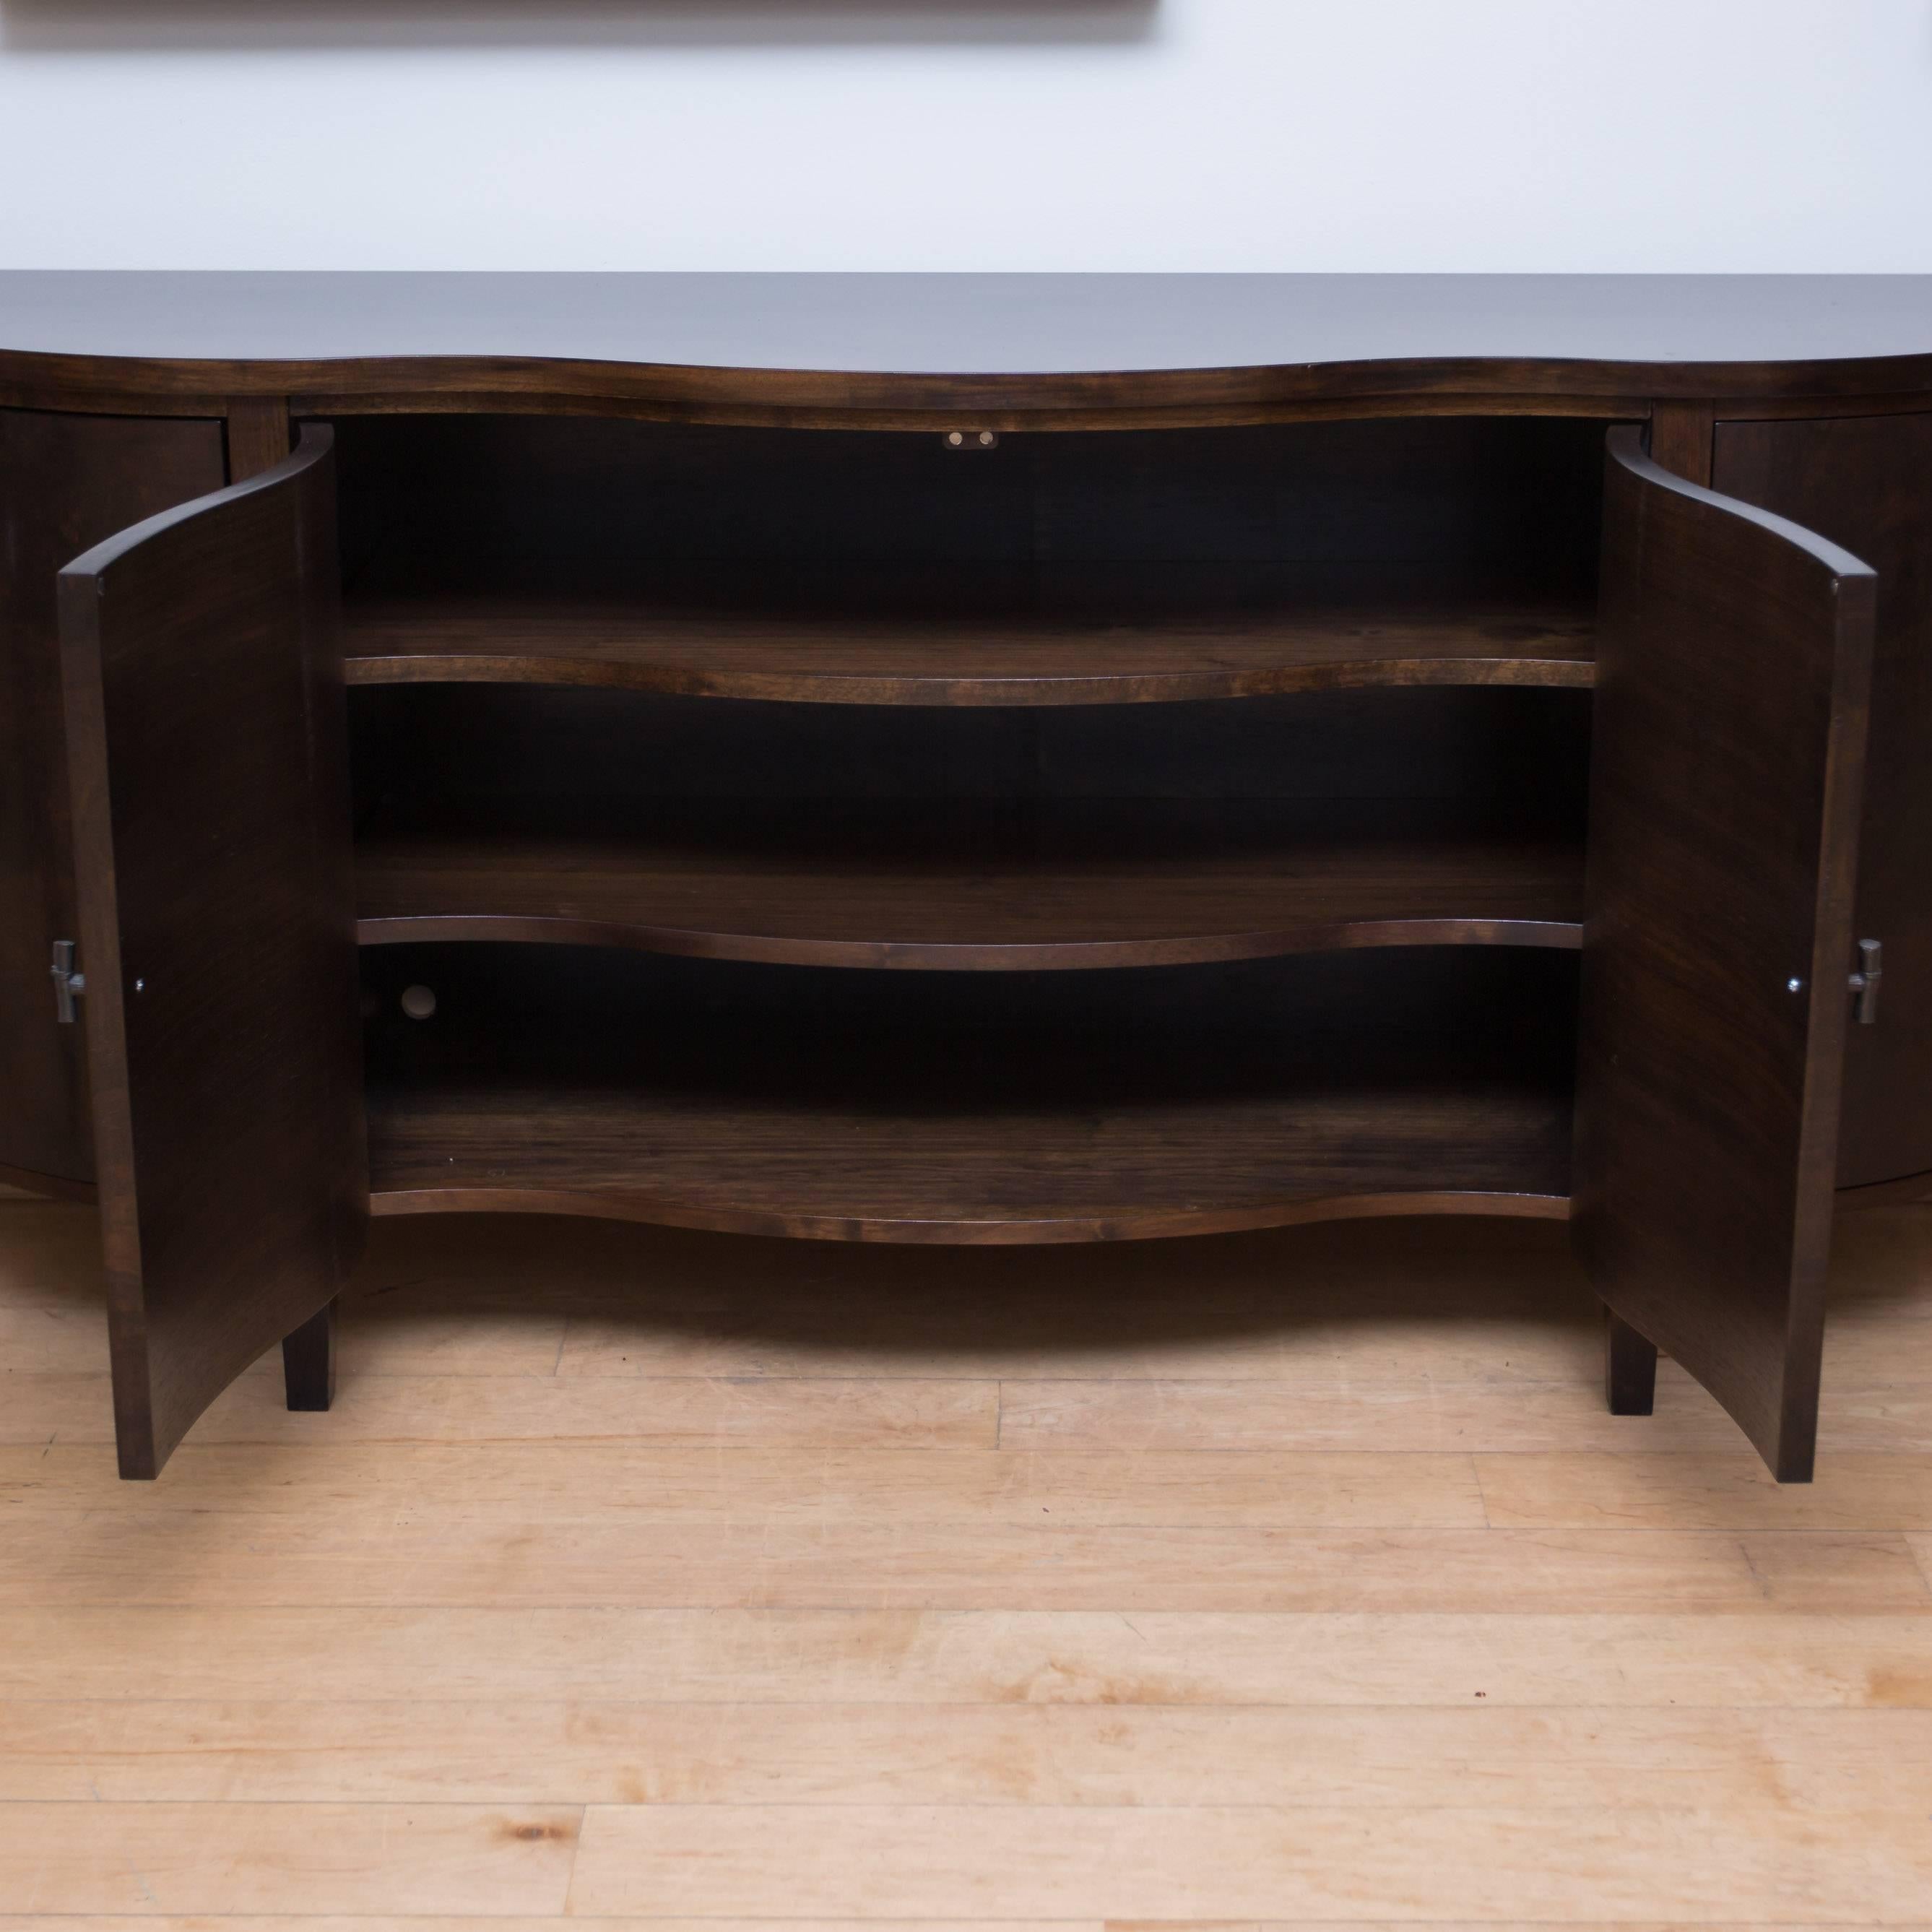 A whole new take on the classic server/sideboard. This curved front buffet with its beautifully bookmatched burl walnut veneers and pewter pulls is a custom piece that will reflect well on its new owner's one-of-a-kind taste.